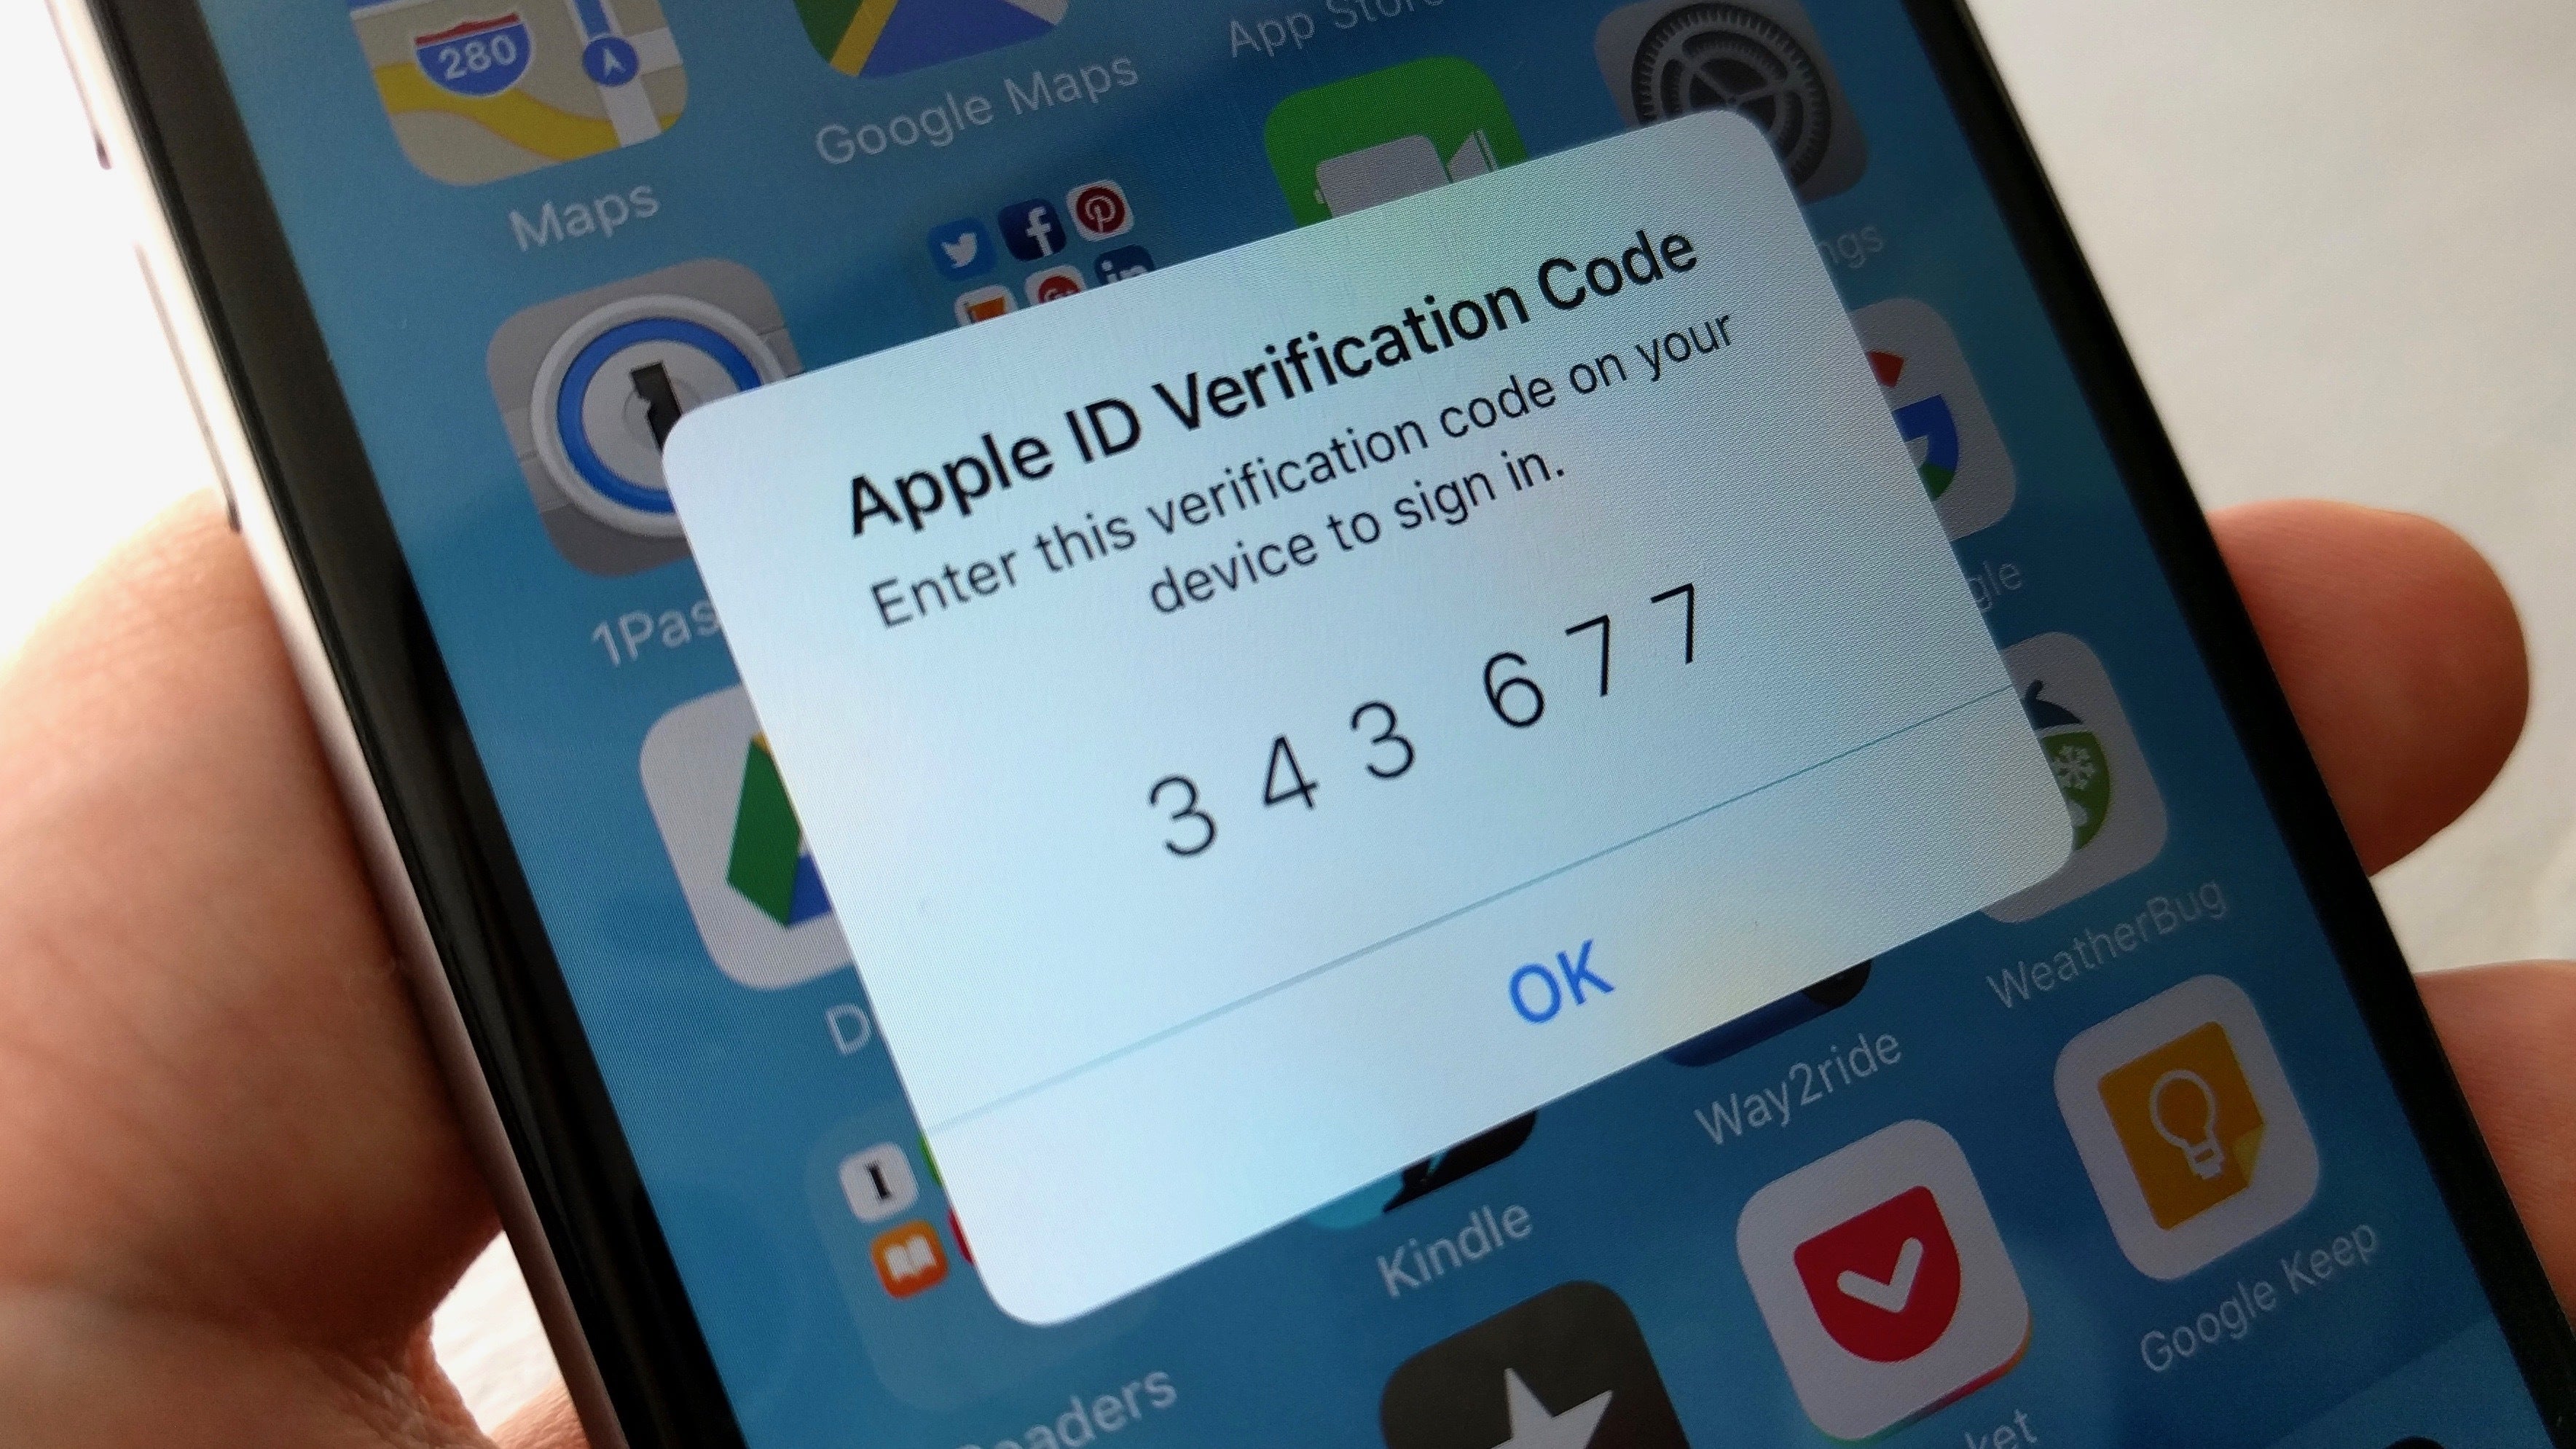 4 easy ways to keep your iCloud password safe | PCWorld